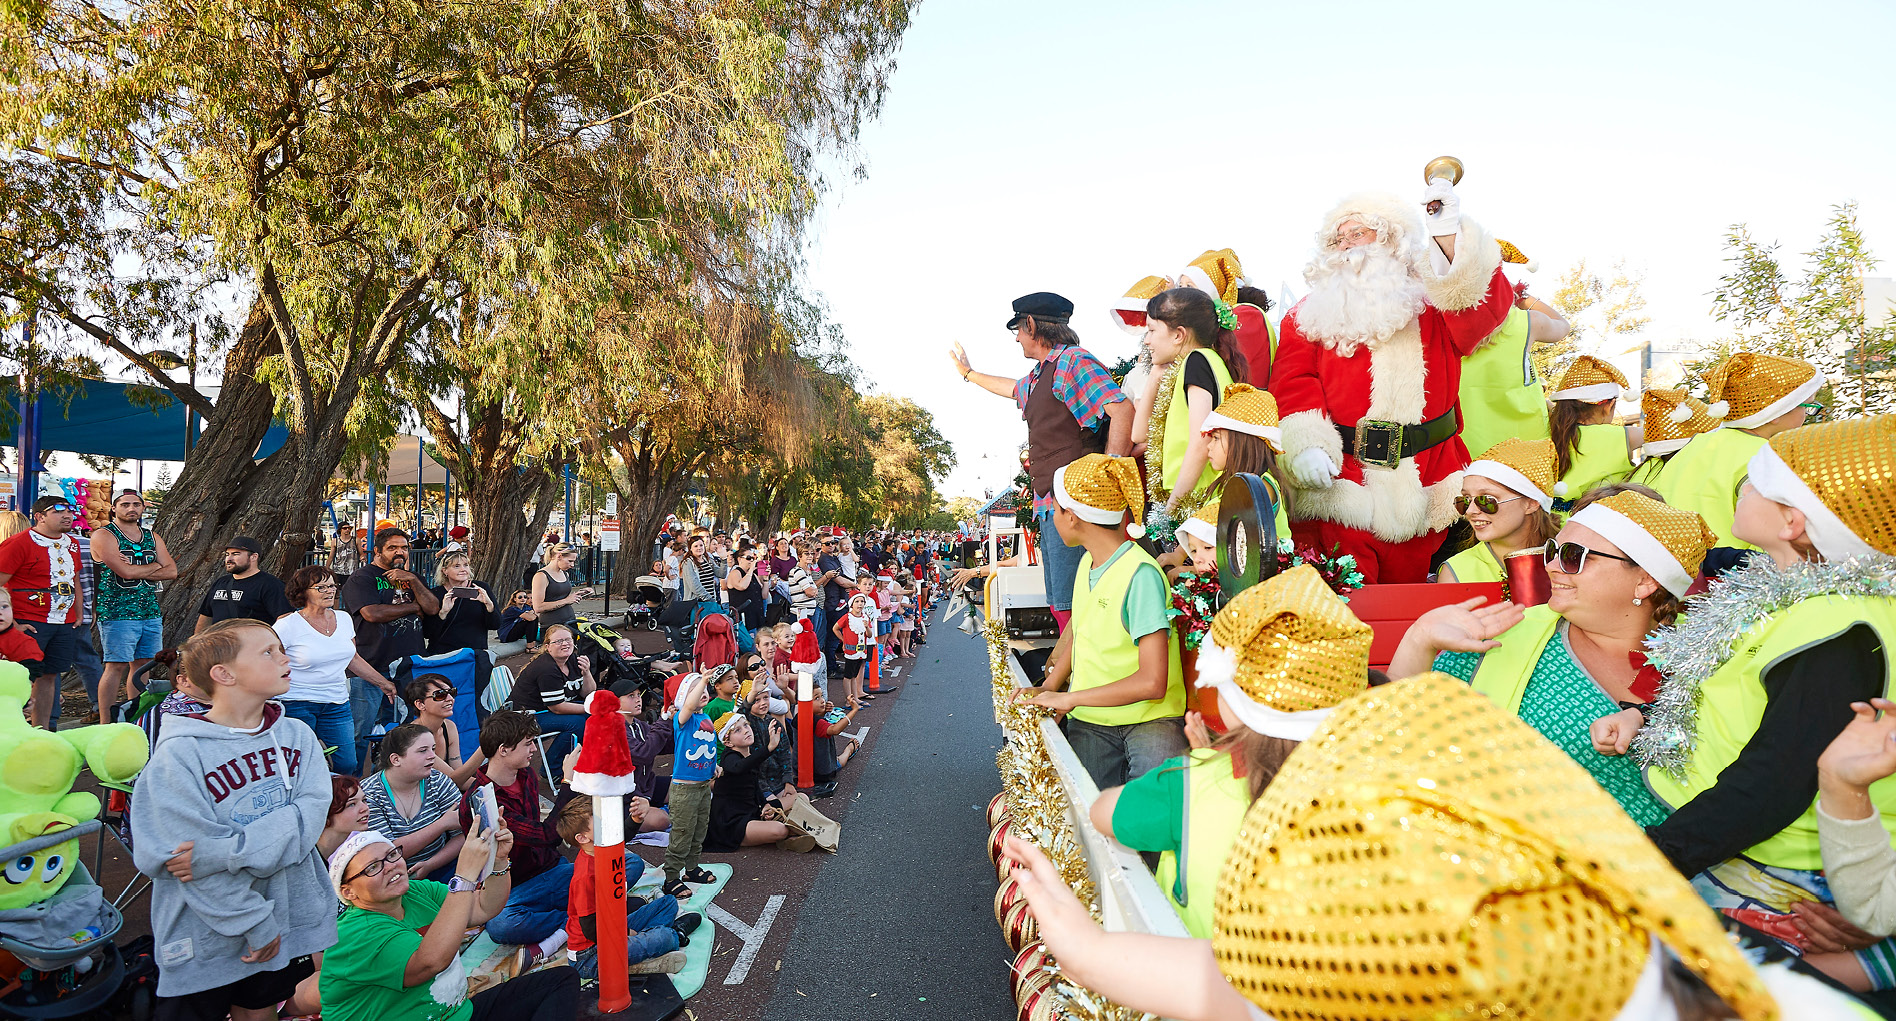 Santa and his elfs riding on a float with members of the public dressed in Christmas dress up watching on from the side of the road